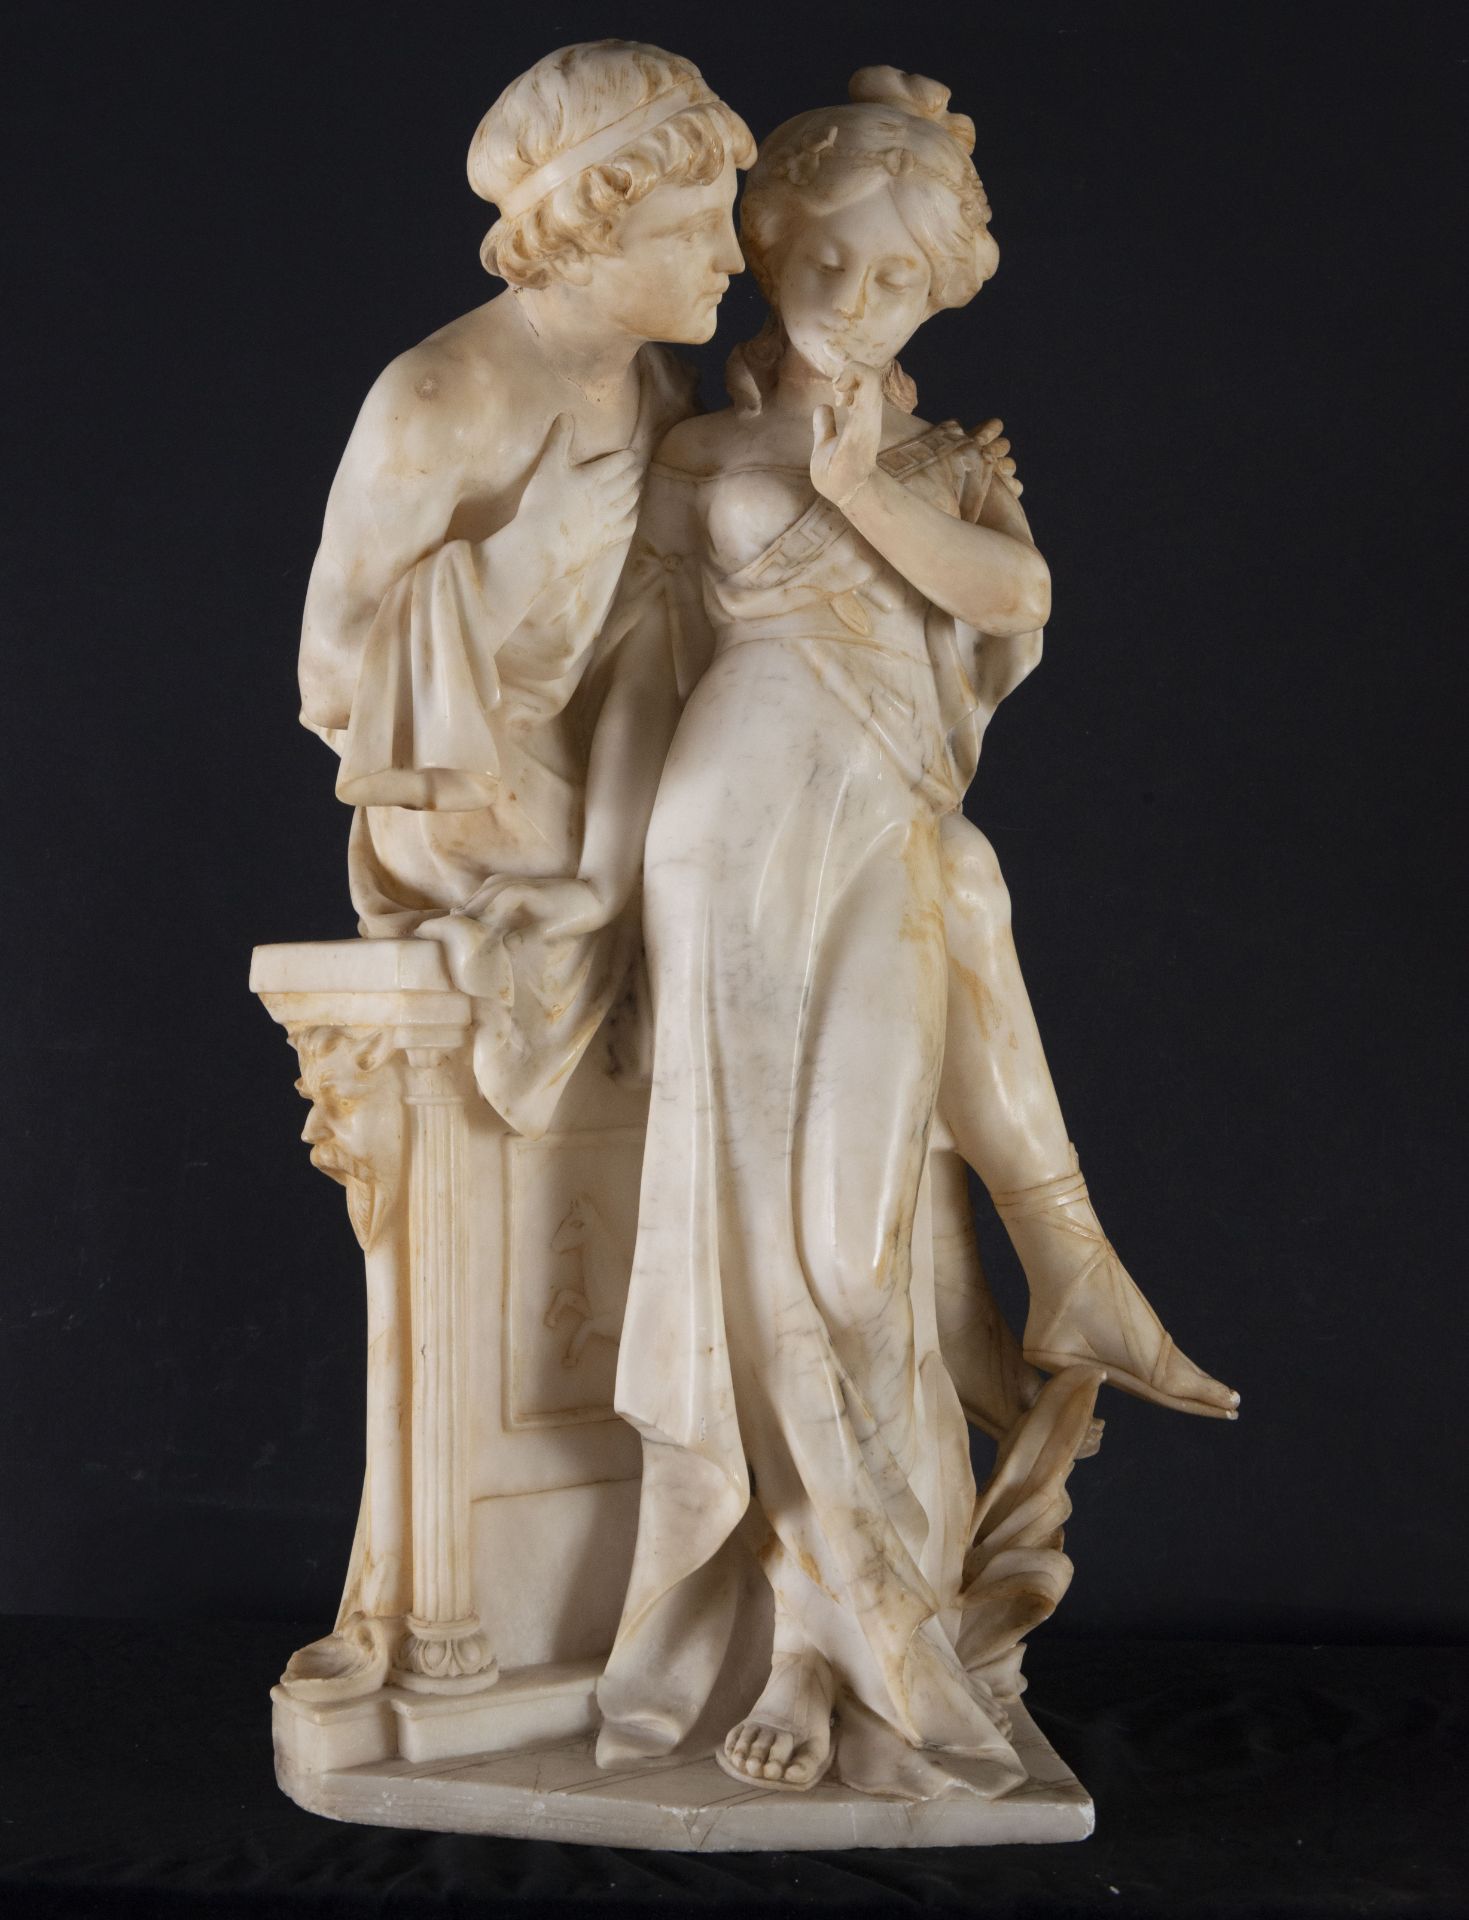 Important Great Couple of Lovers in Alabaster, Adolfo Cipriani, Italy (1880 - 1930), 19th century It